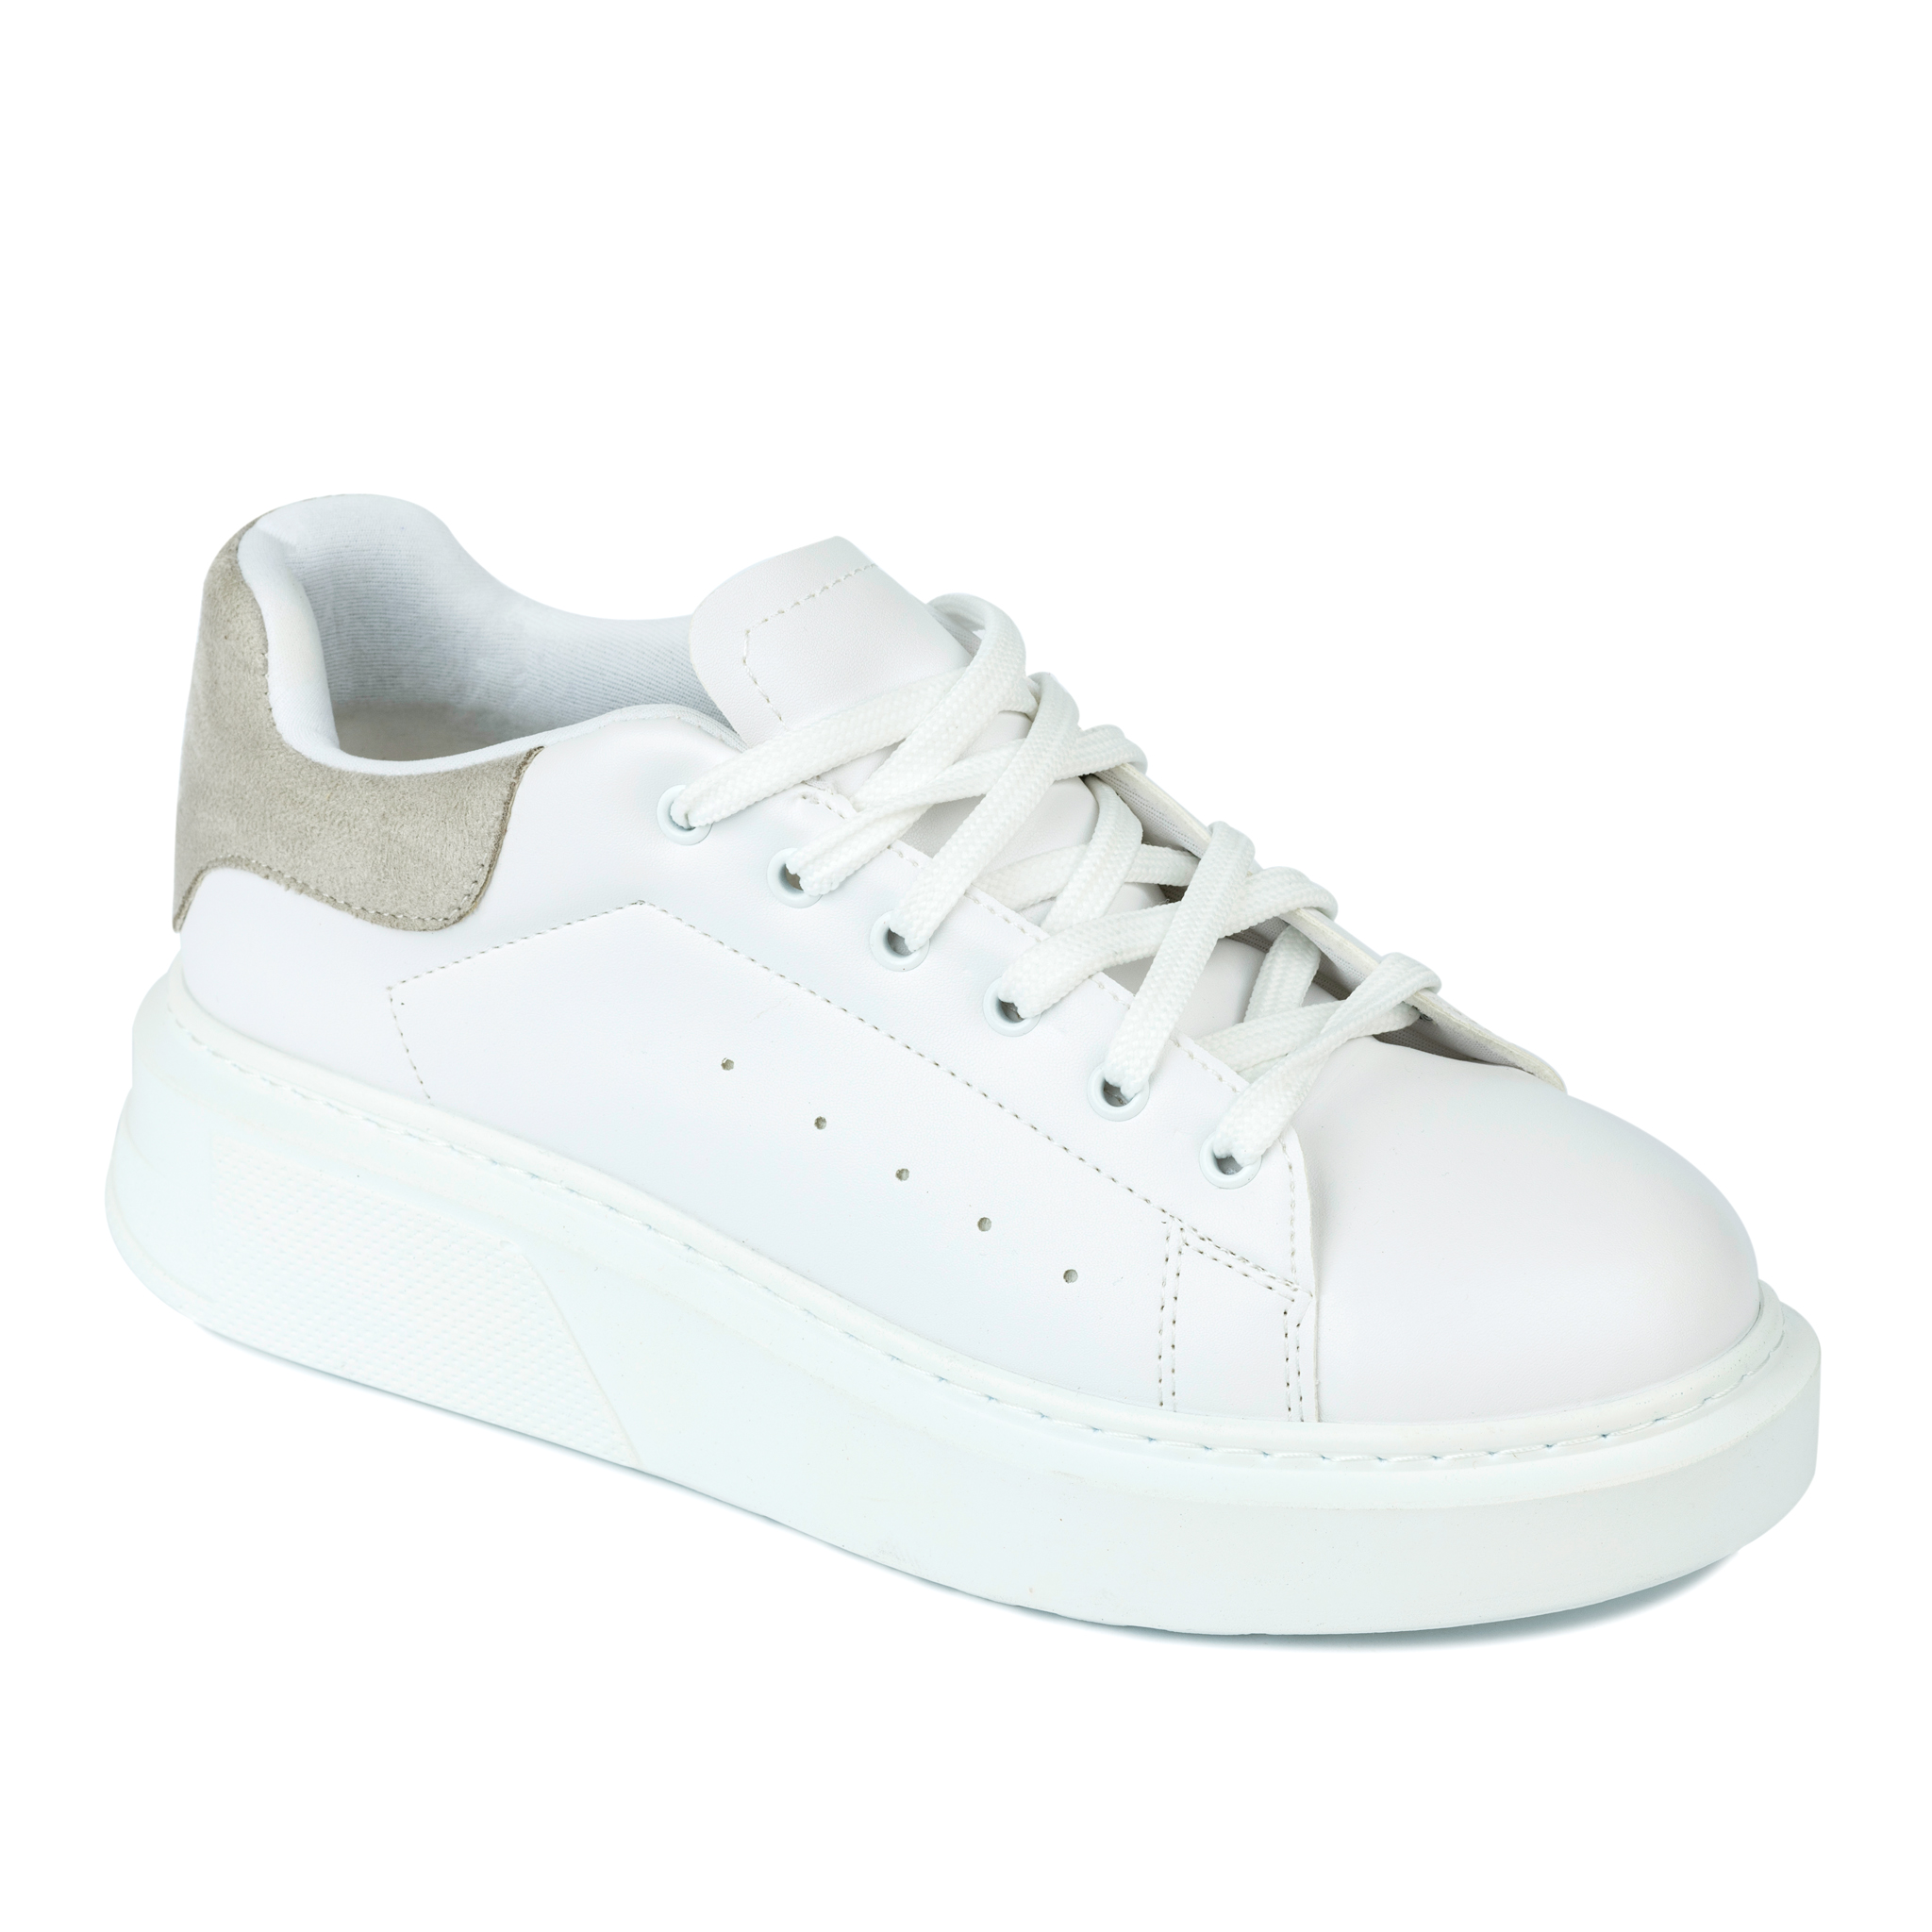 HIGH SOLE SNEAKERS - WHITE/GRAY